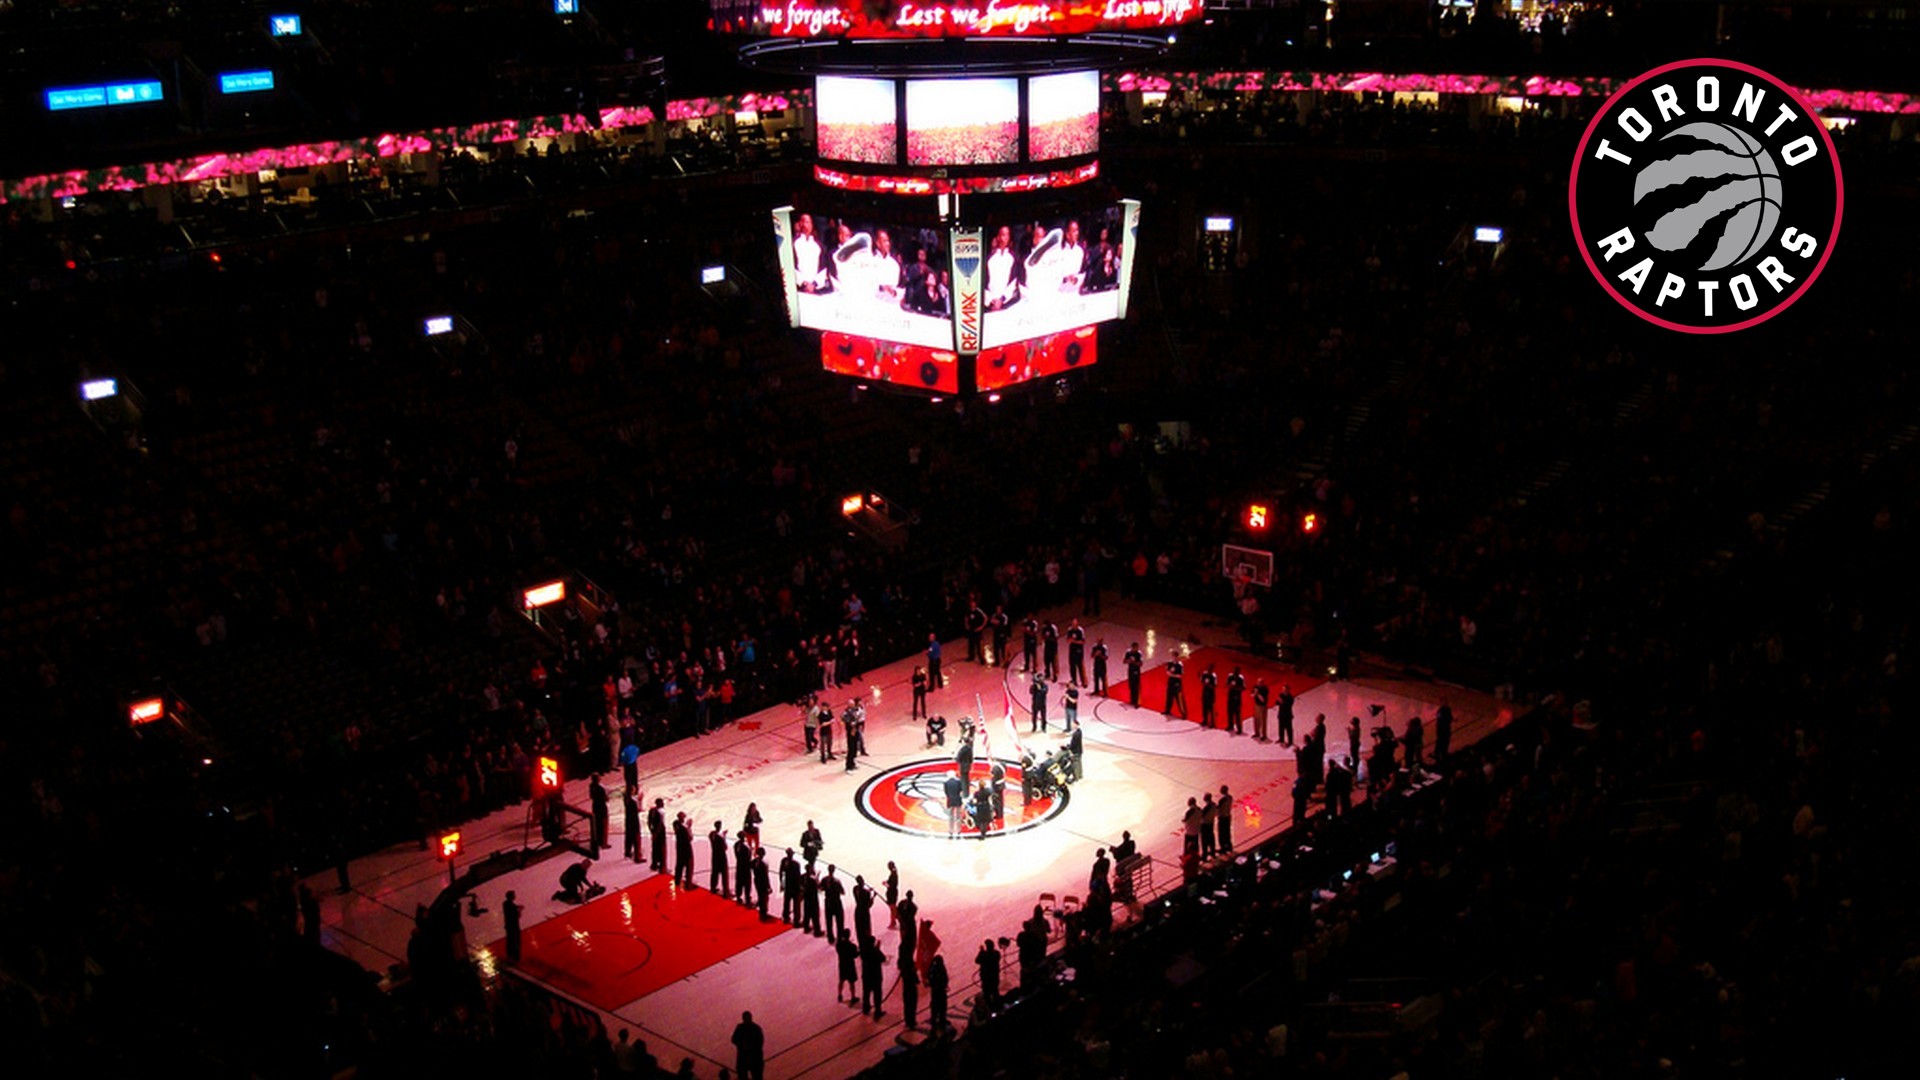 Toronto Raptors Stadium Wallpaper with image dimensions 1920x1080 pixel. You can make this wallpaper for your Desktop Computer Backgrounds, Windows or Mac Screensavers, iPhone Lock screen, Tablet or Android and another Mobile Phone device